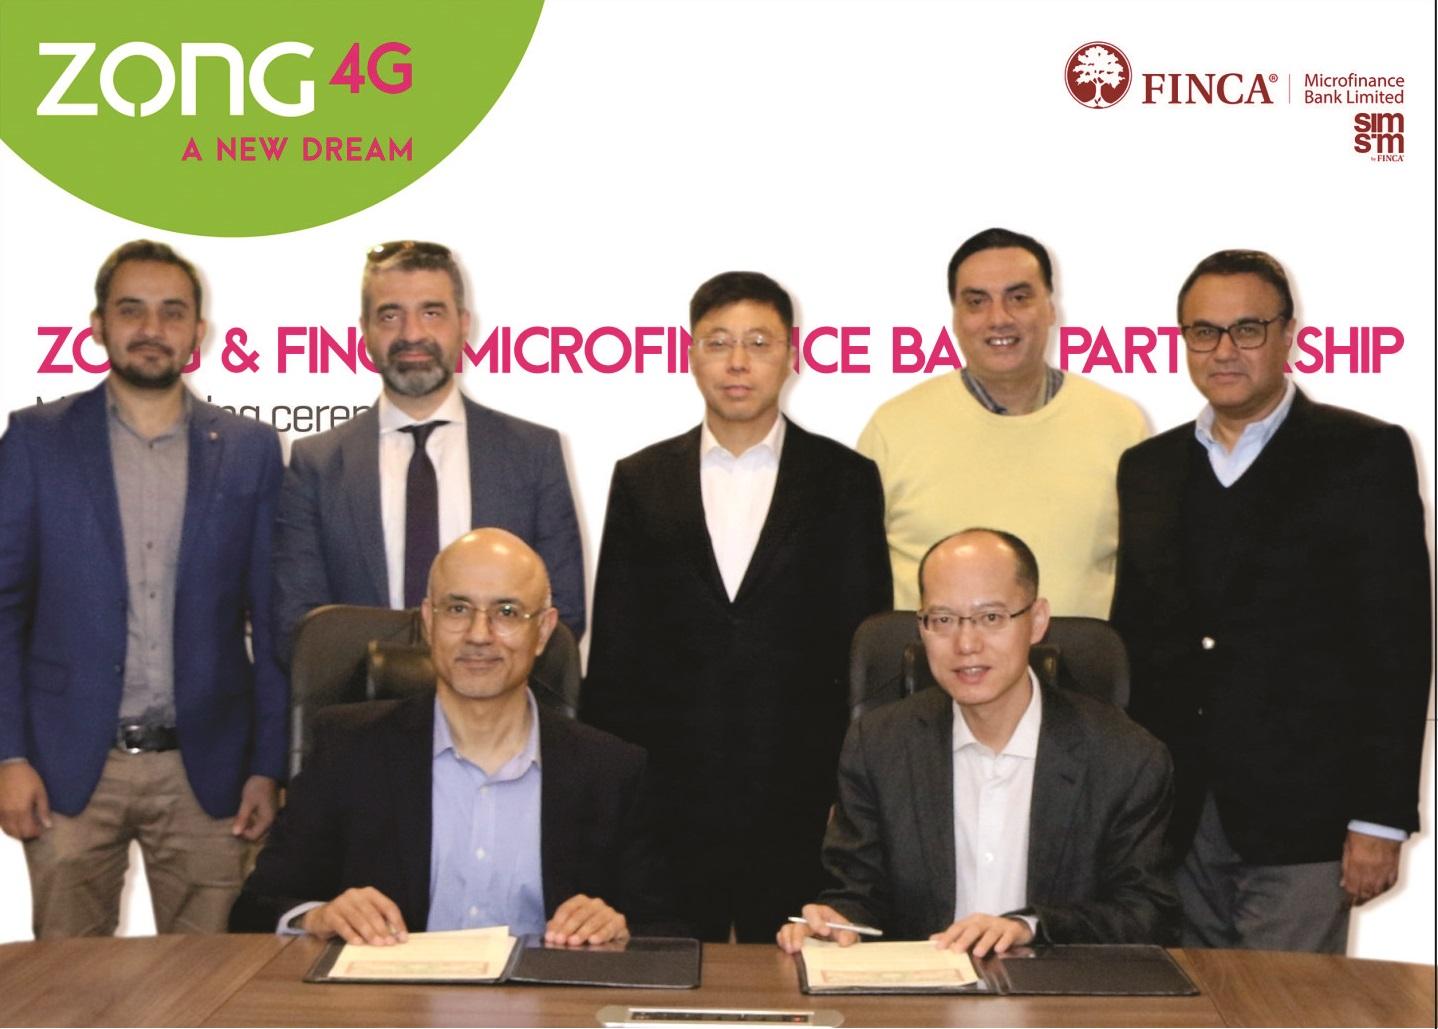 Zong 4G and FINCA Microfinance Bank to digitally empower Corporate Organizations across Pakistan